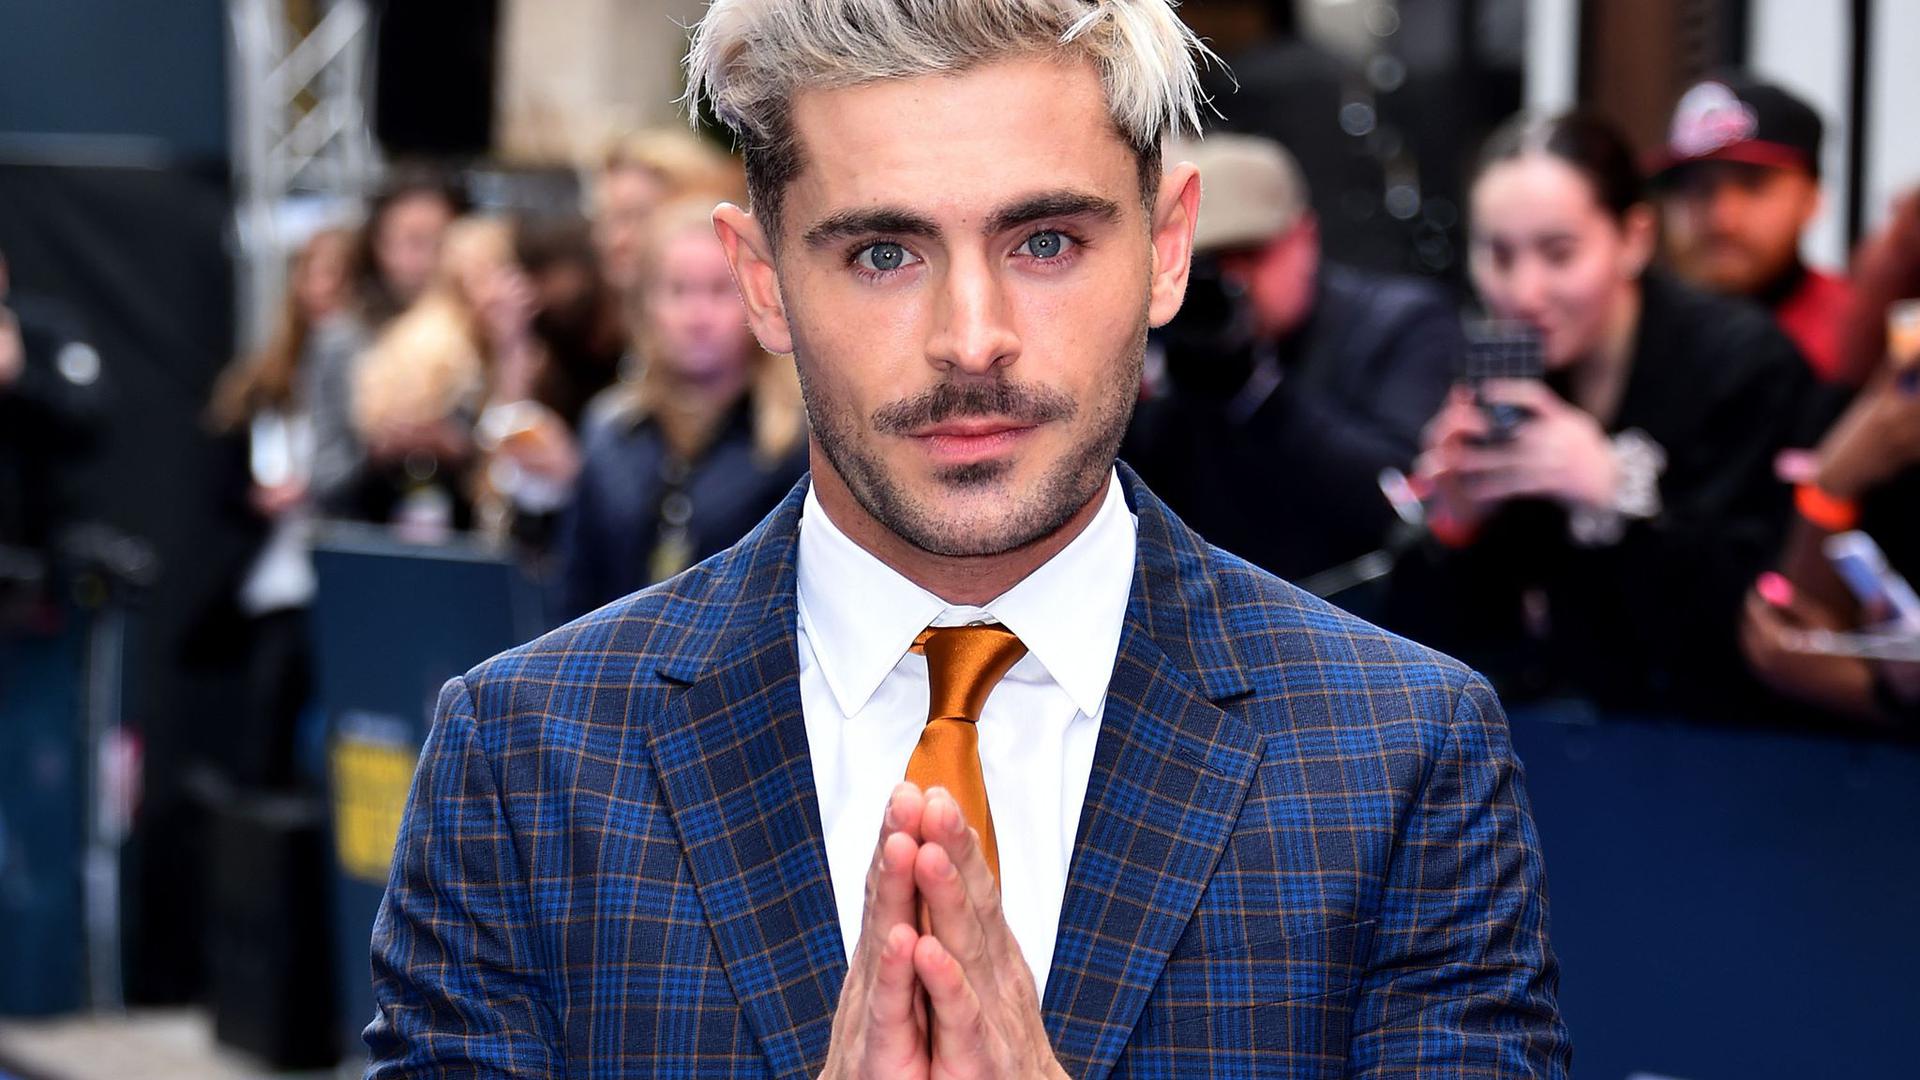 Zac Efron kommt 2019 zur London-Premiere des Films „Extremely Wicked, Shockingly Evil and Vile“.